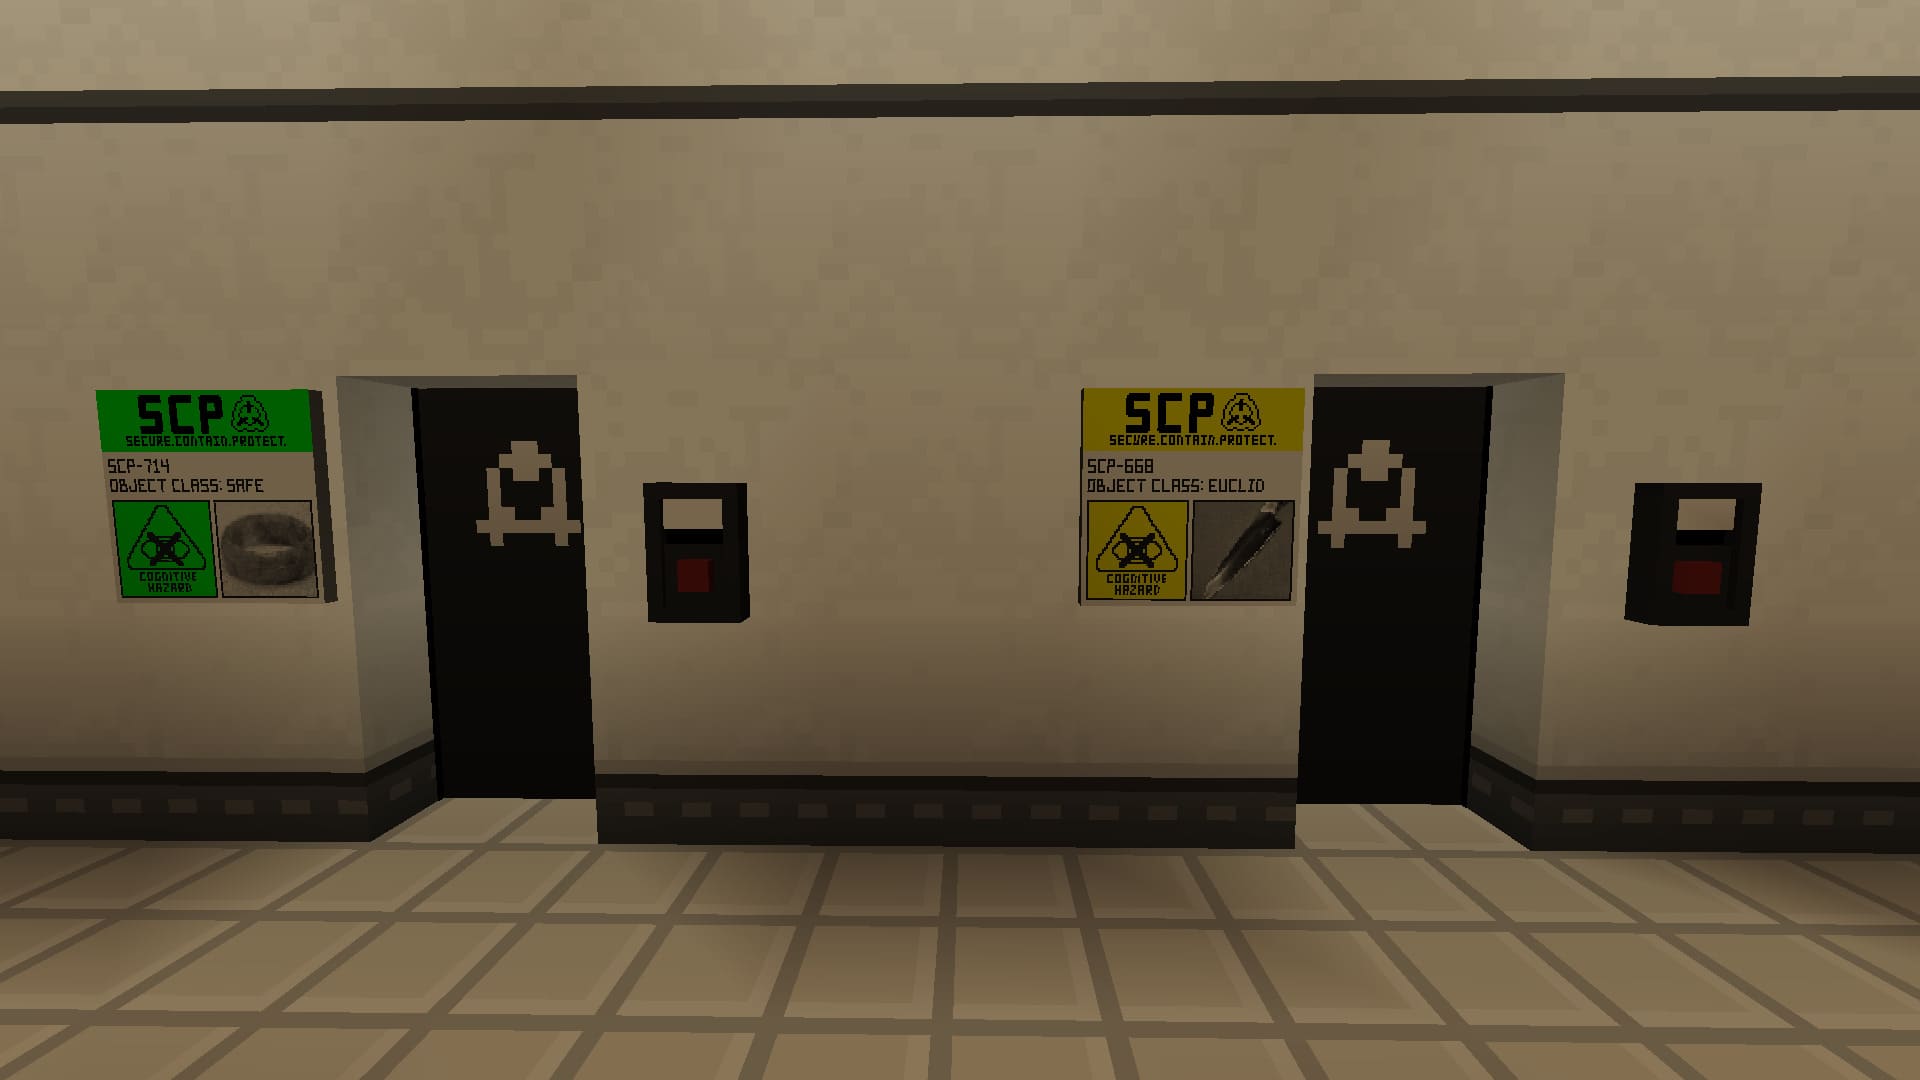 SCP 714 Demonstrations In SCP Containment Breach Ultimate Edition 